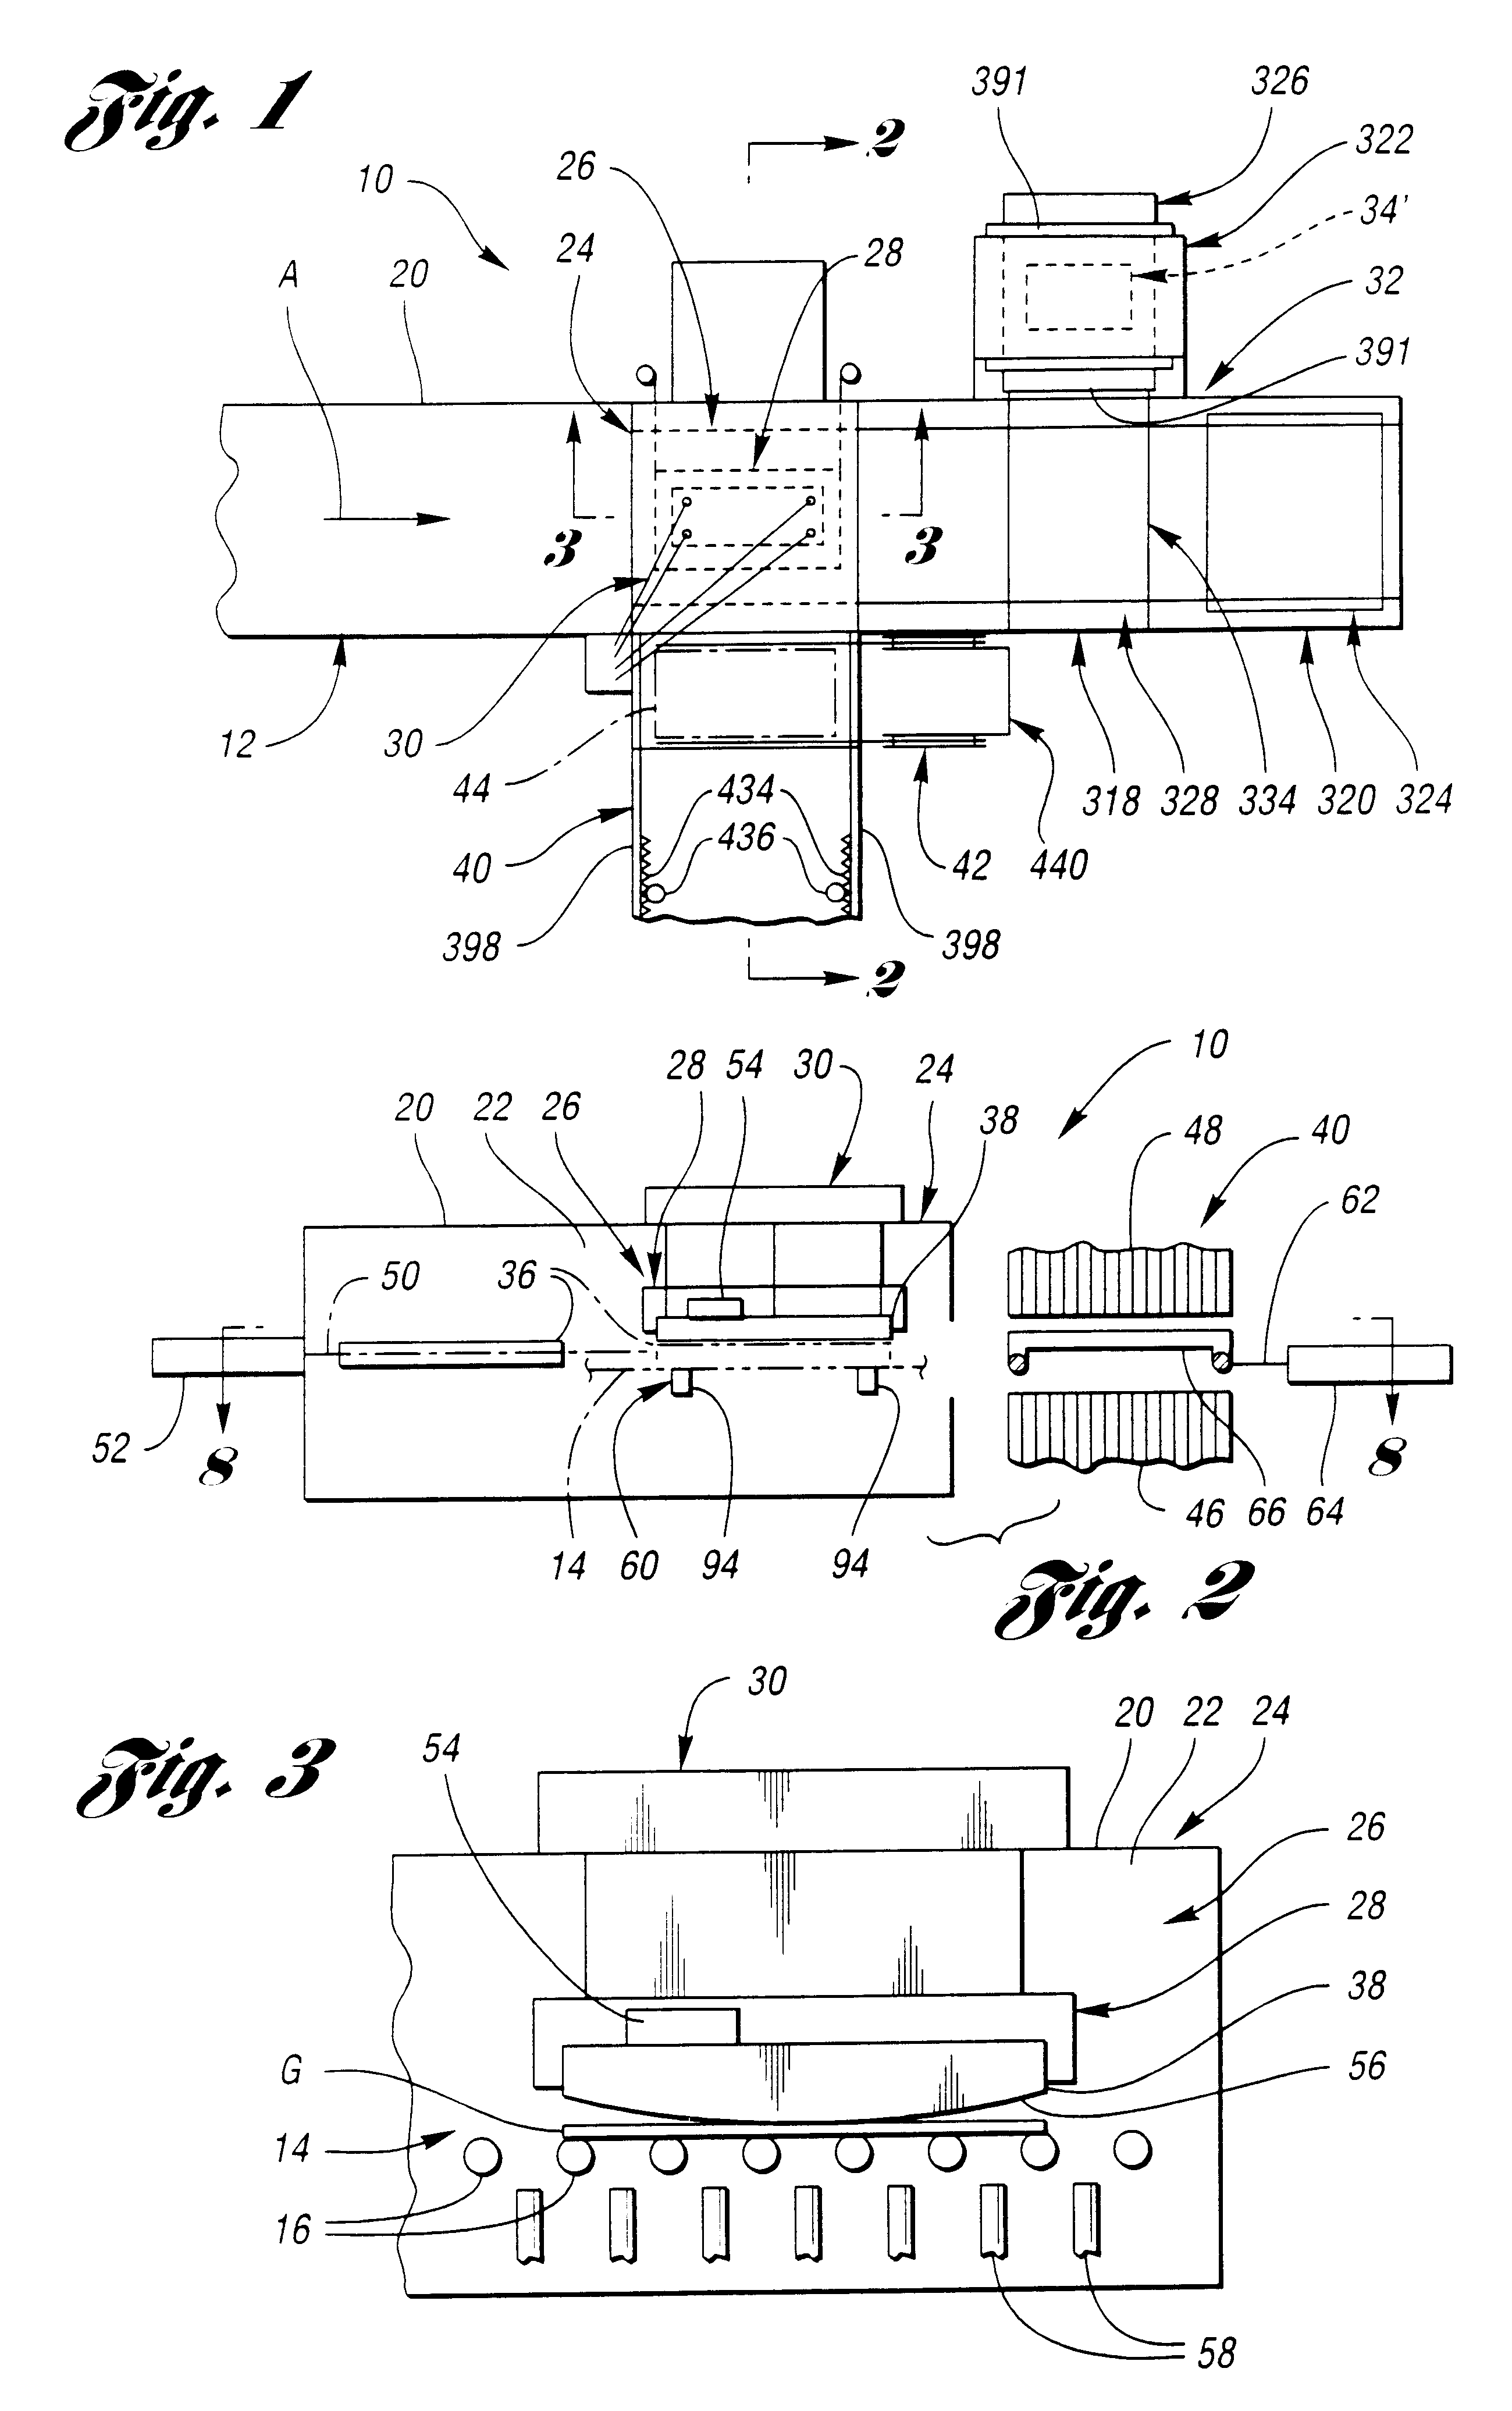 Method for mold changing in heated glass sheet forming station